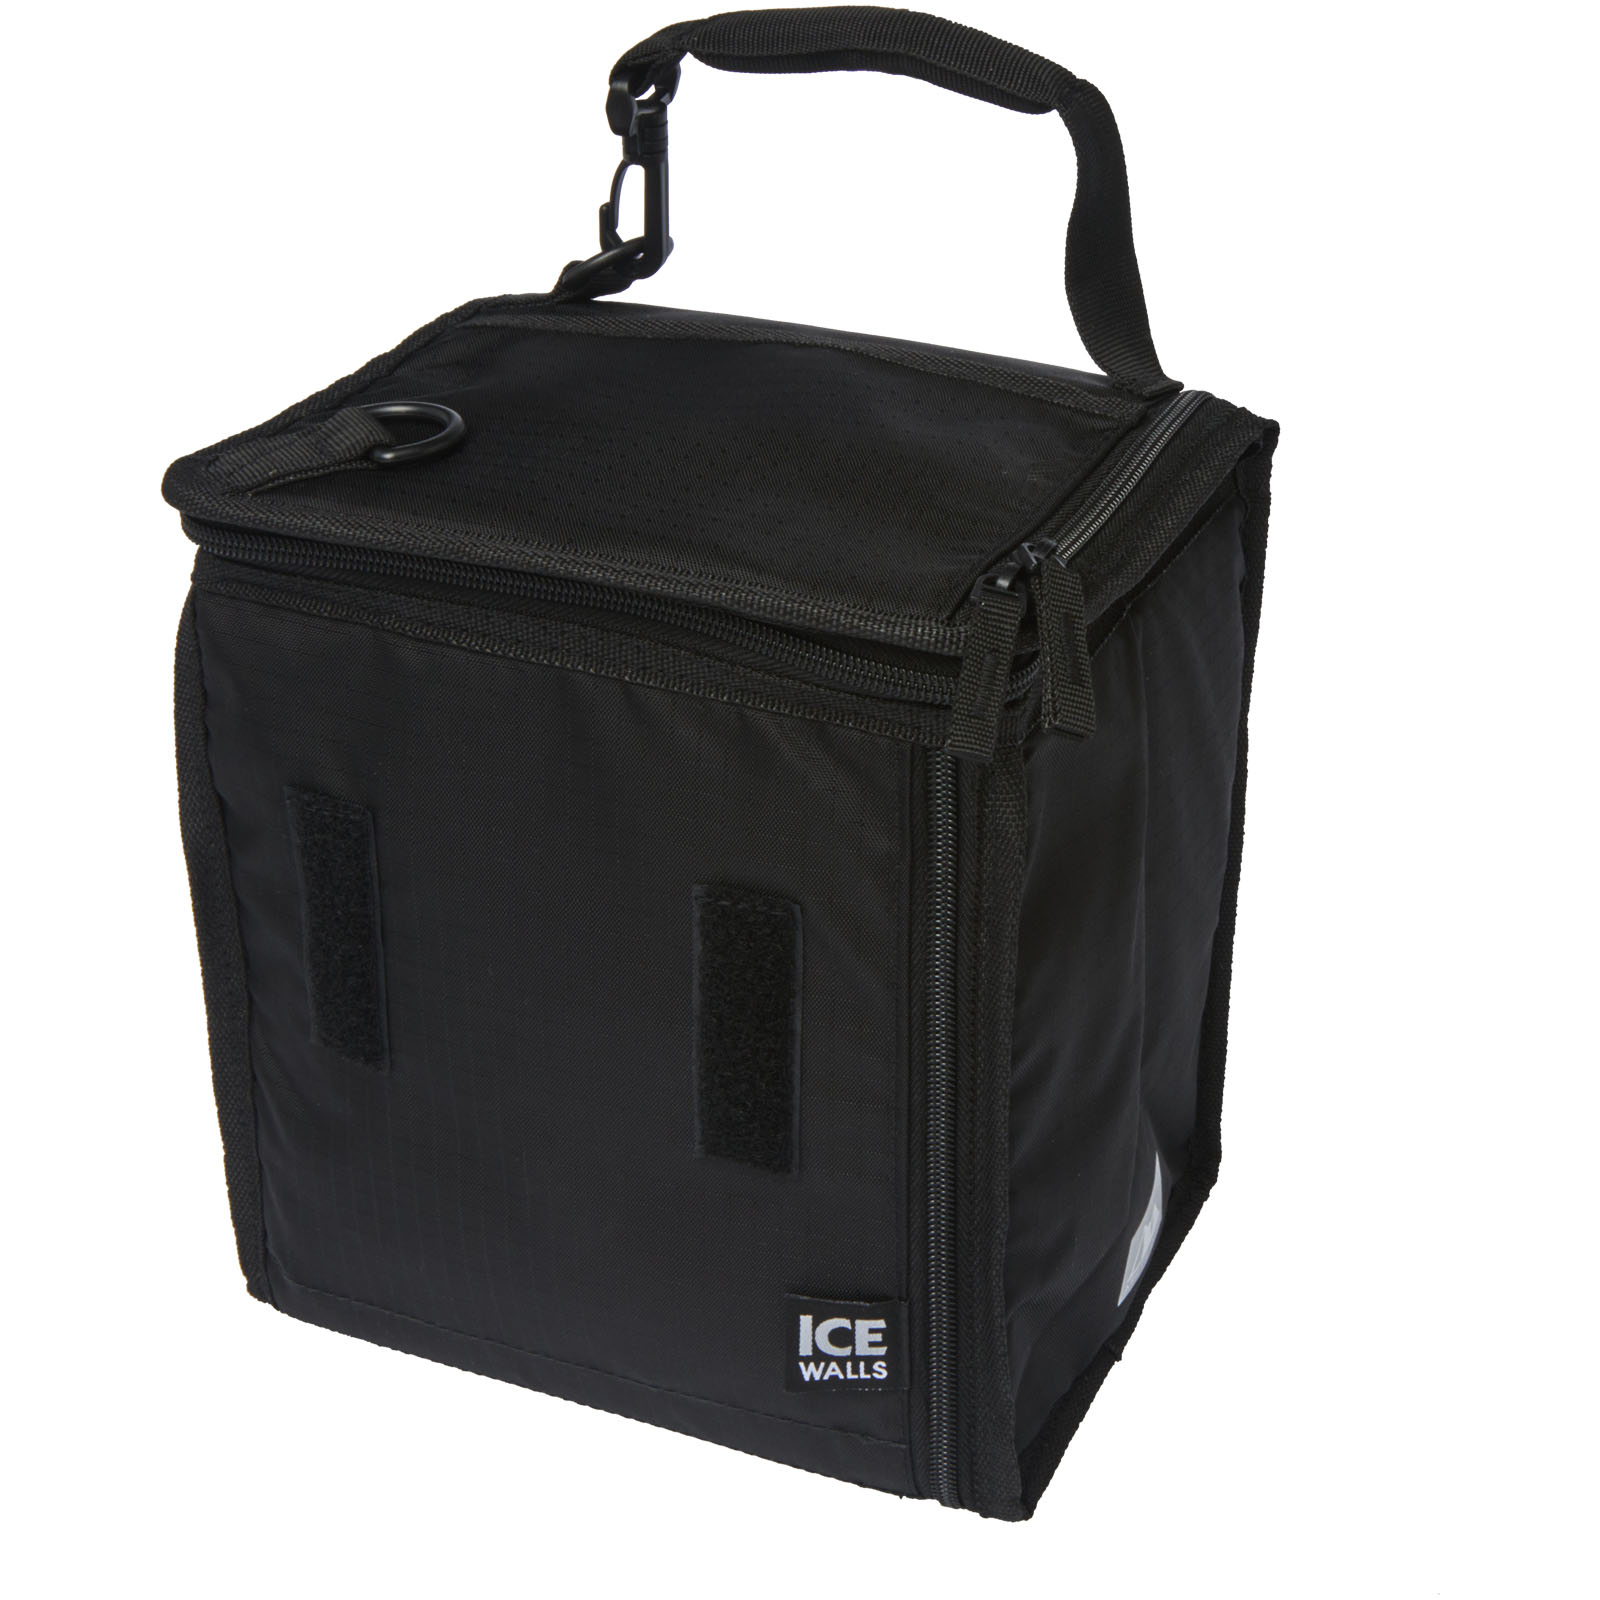 Advertising Cooler bags - Arctic Zone® Ice-wall lunch cooler bag 7L - 5